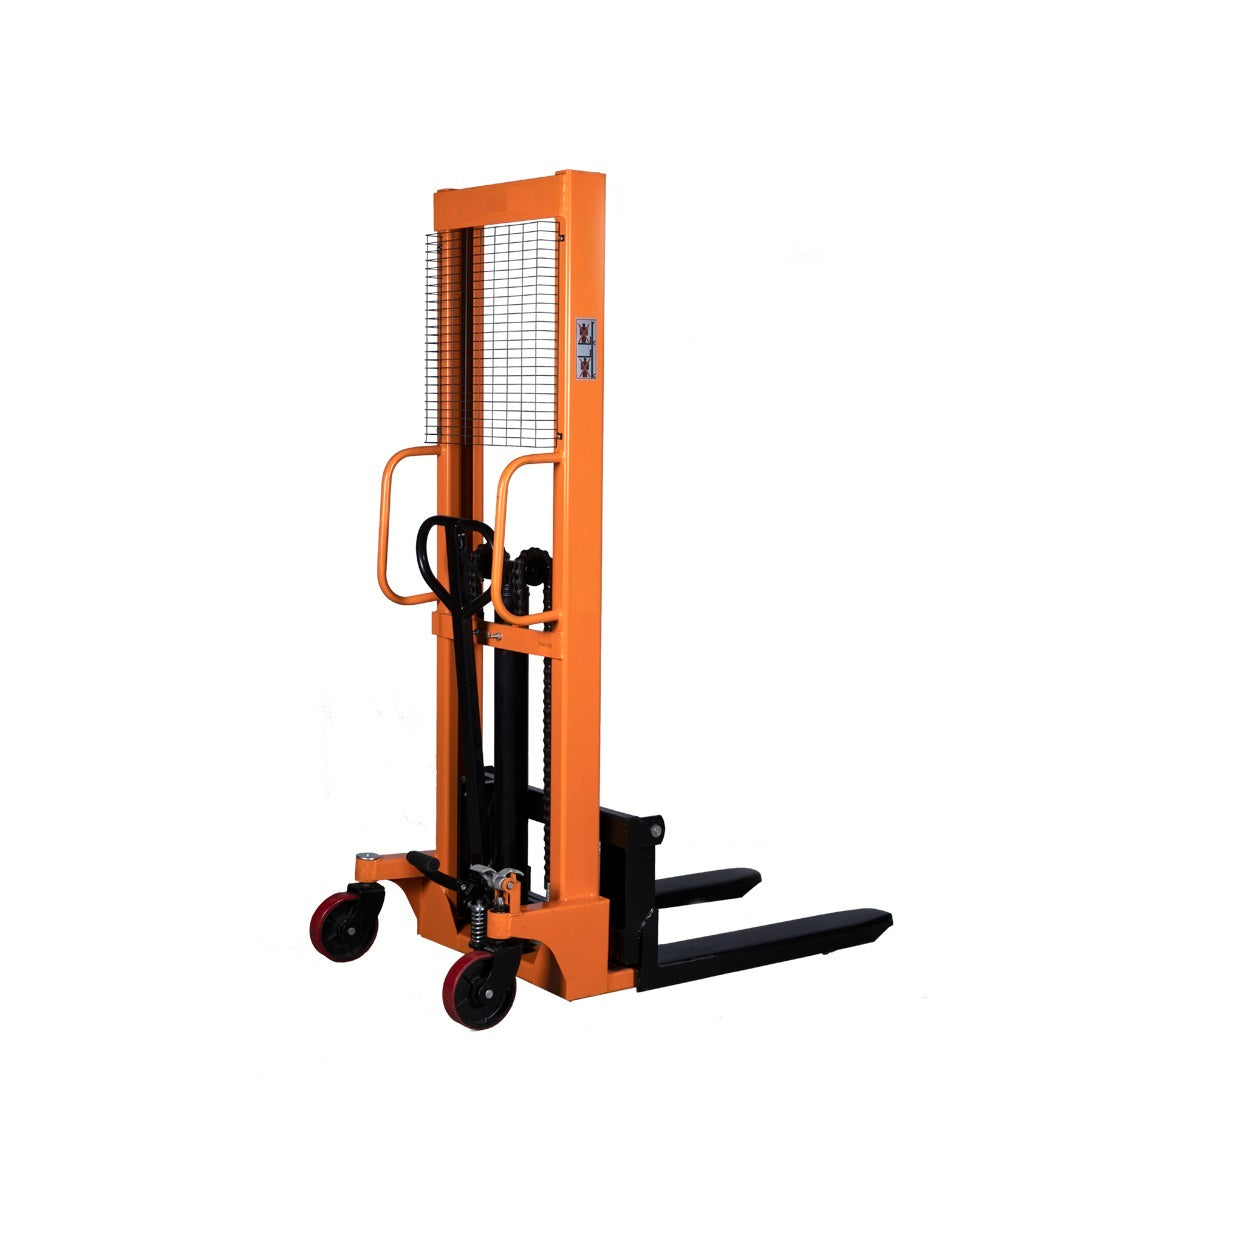 Manual Stacker Hydraulic lift fork 1100mm,1.5 Ton with 1.6m Lifting Height Hand Stacker